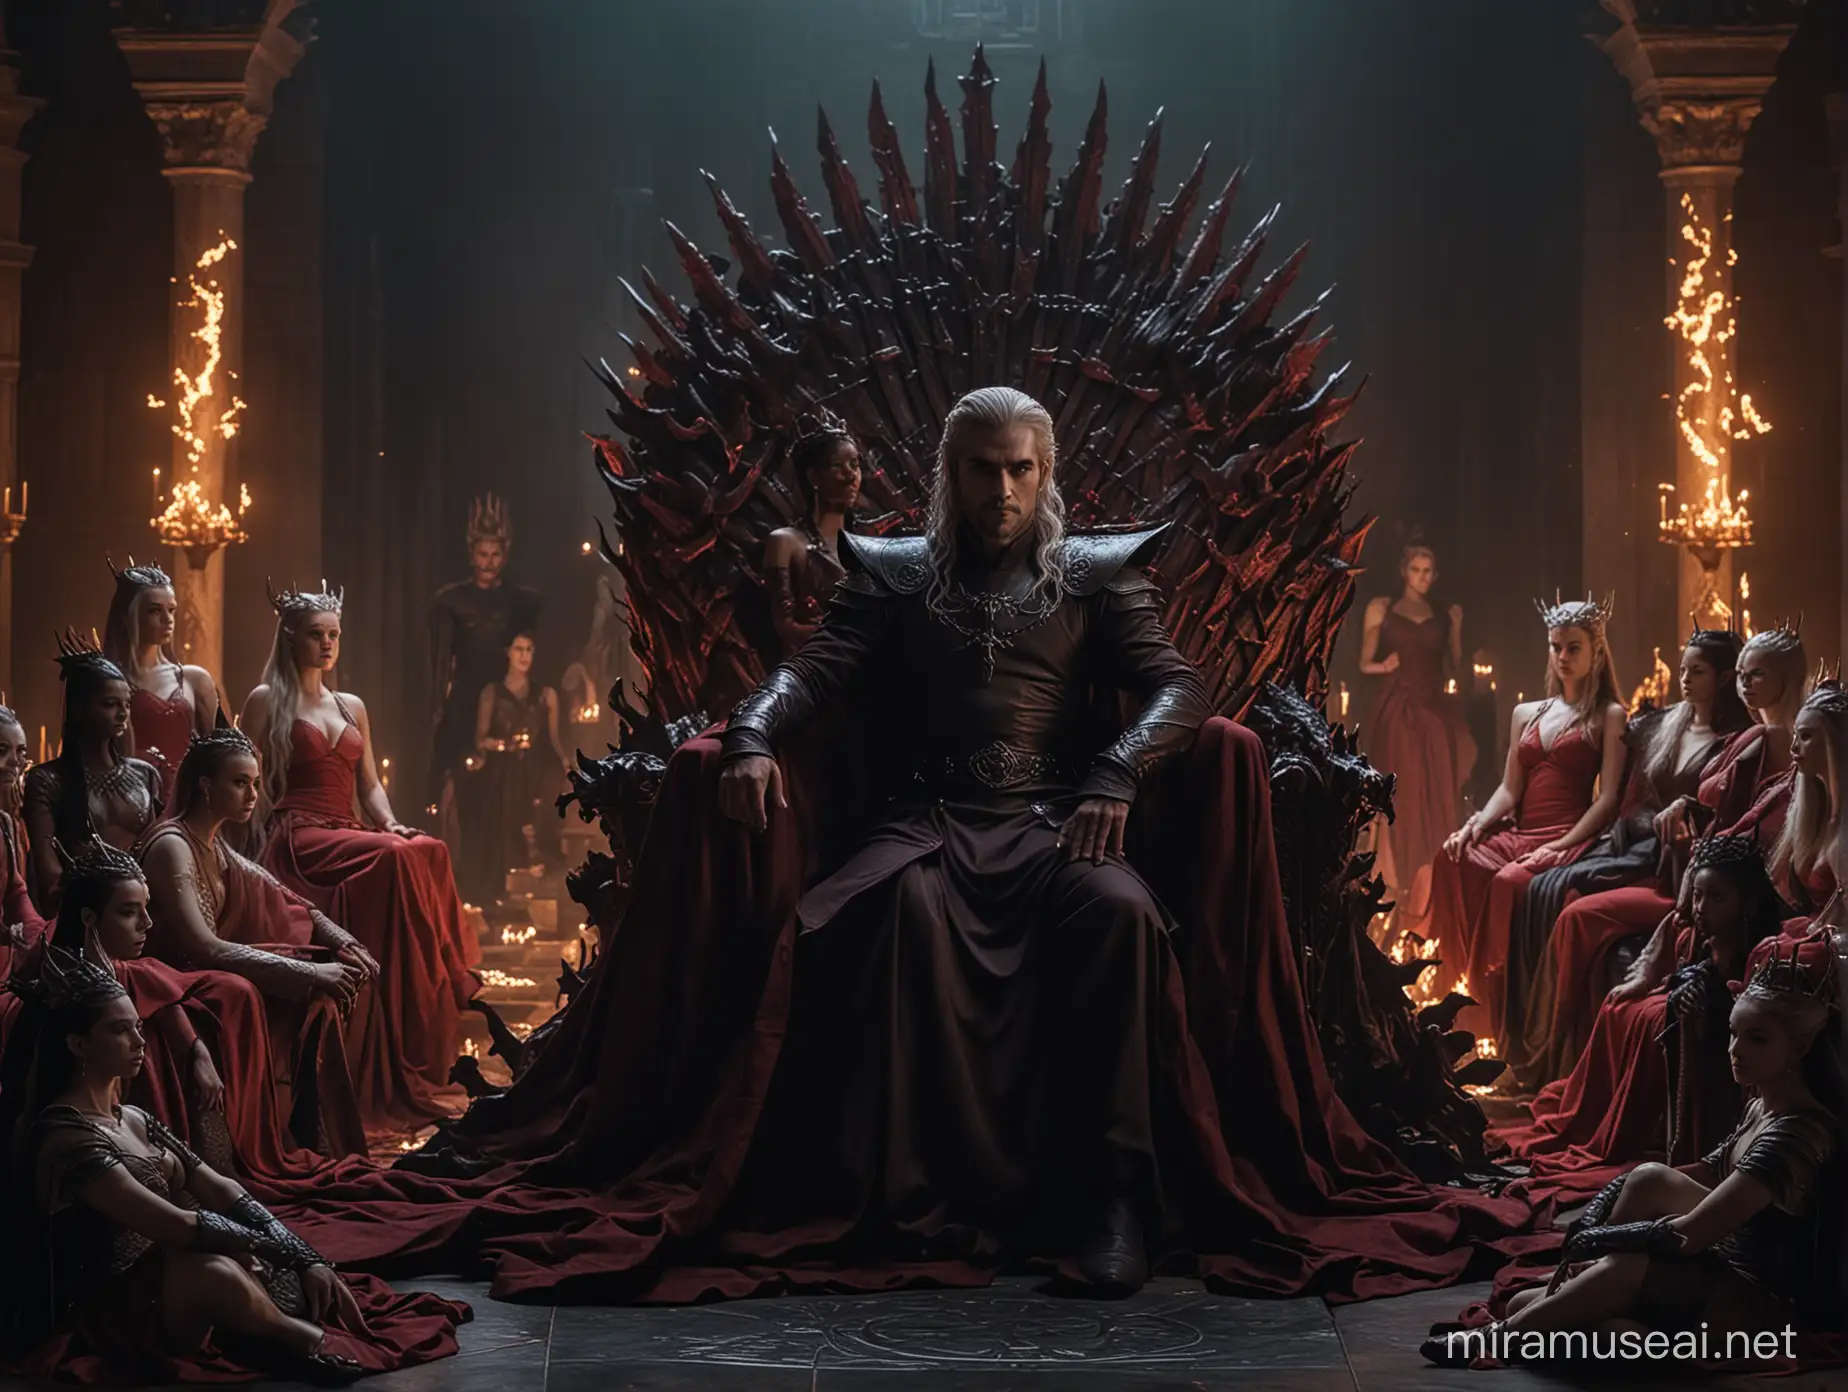 Daemon Targaryen sitting on a throne surrounded by many concubines, night, 8k